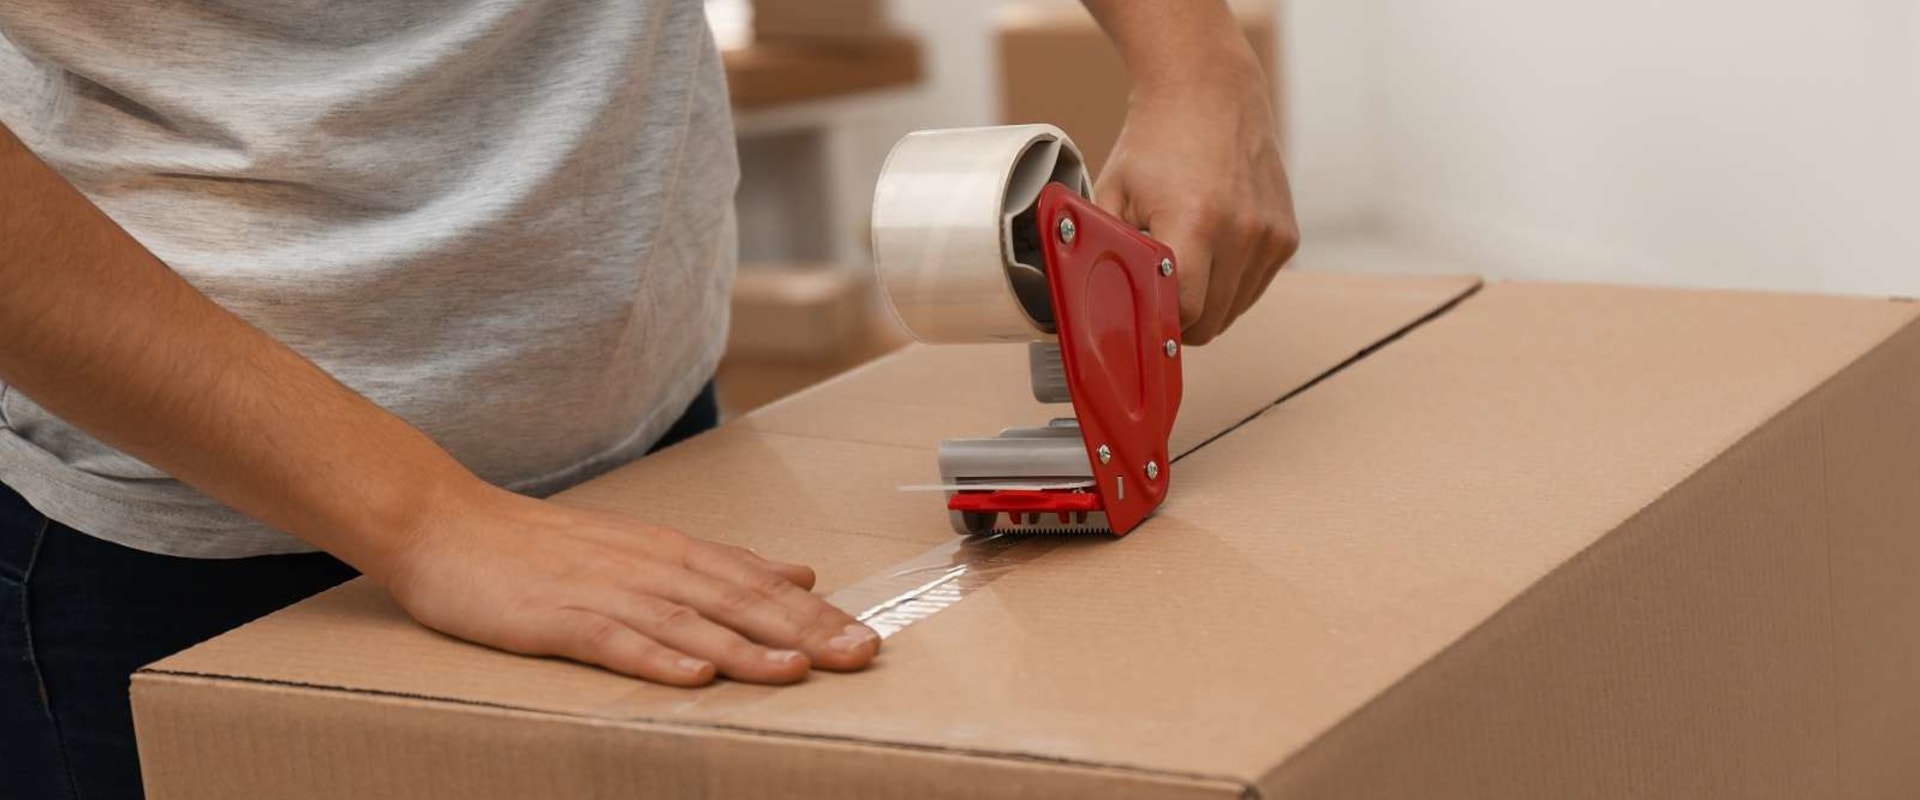 Factors That Impact the Cost of Packing Services in Dallas